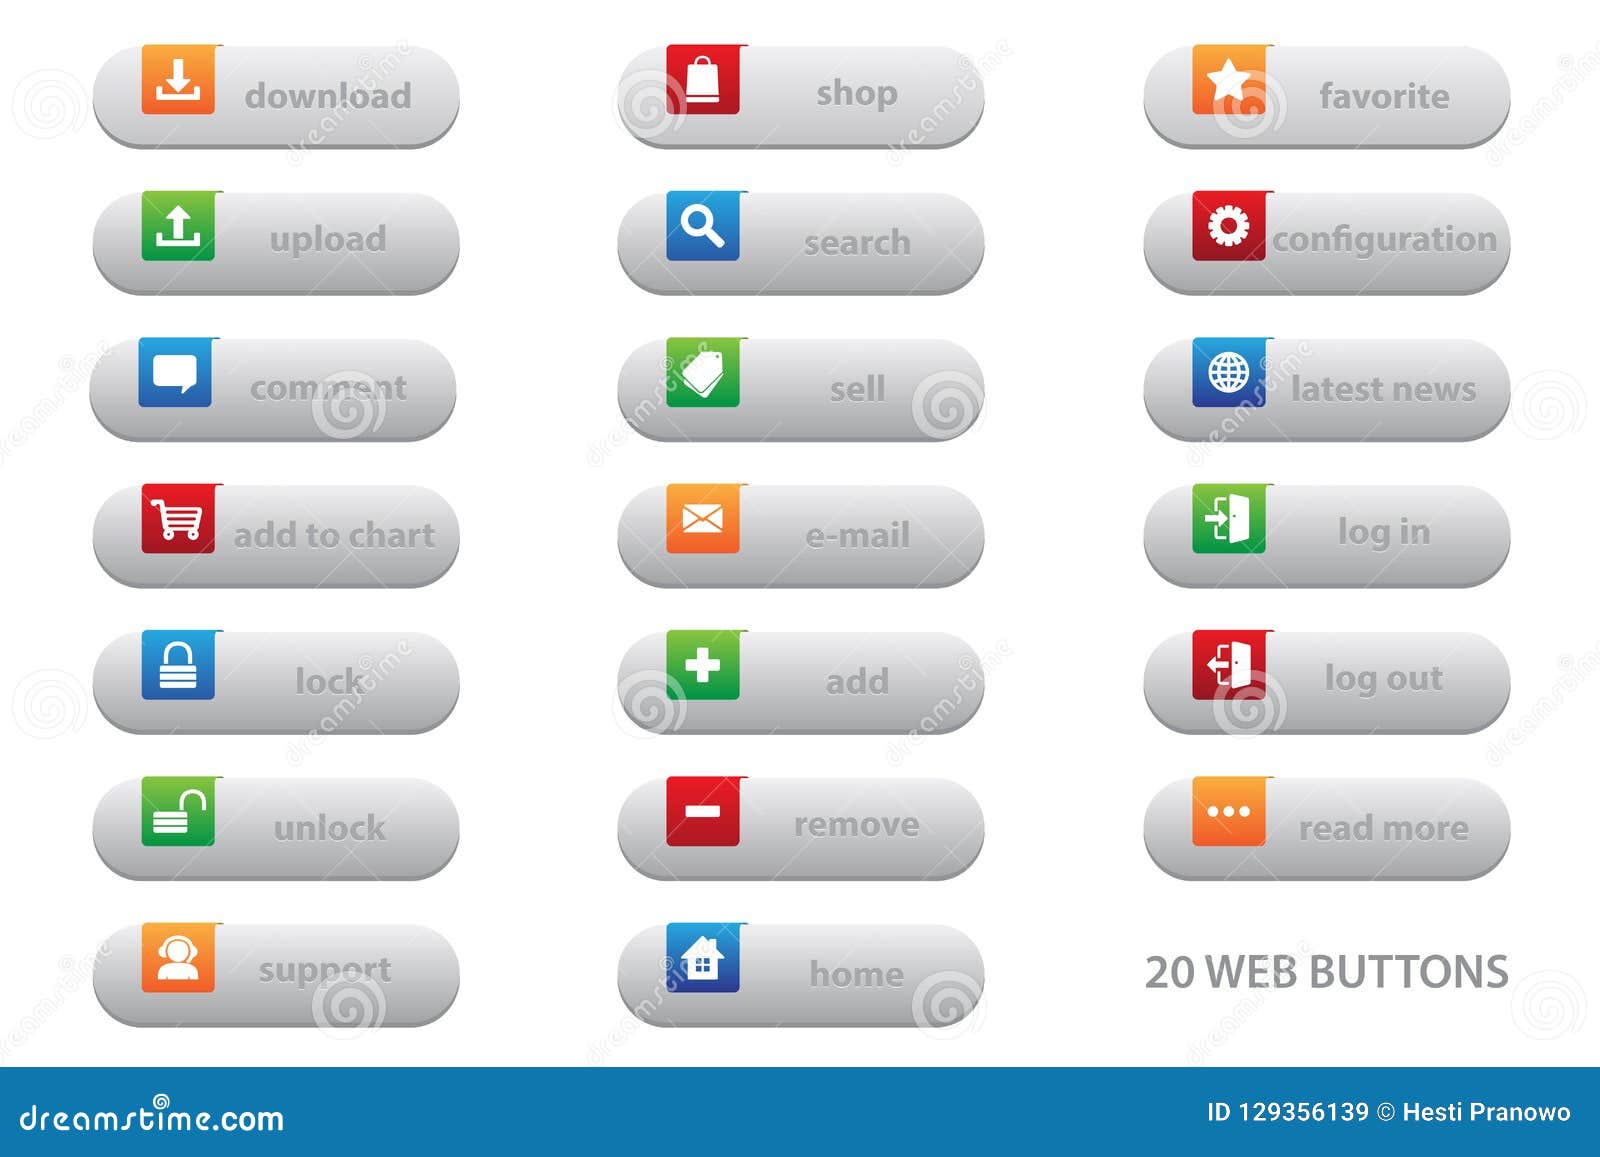 cool free web buttons